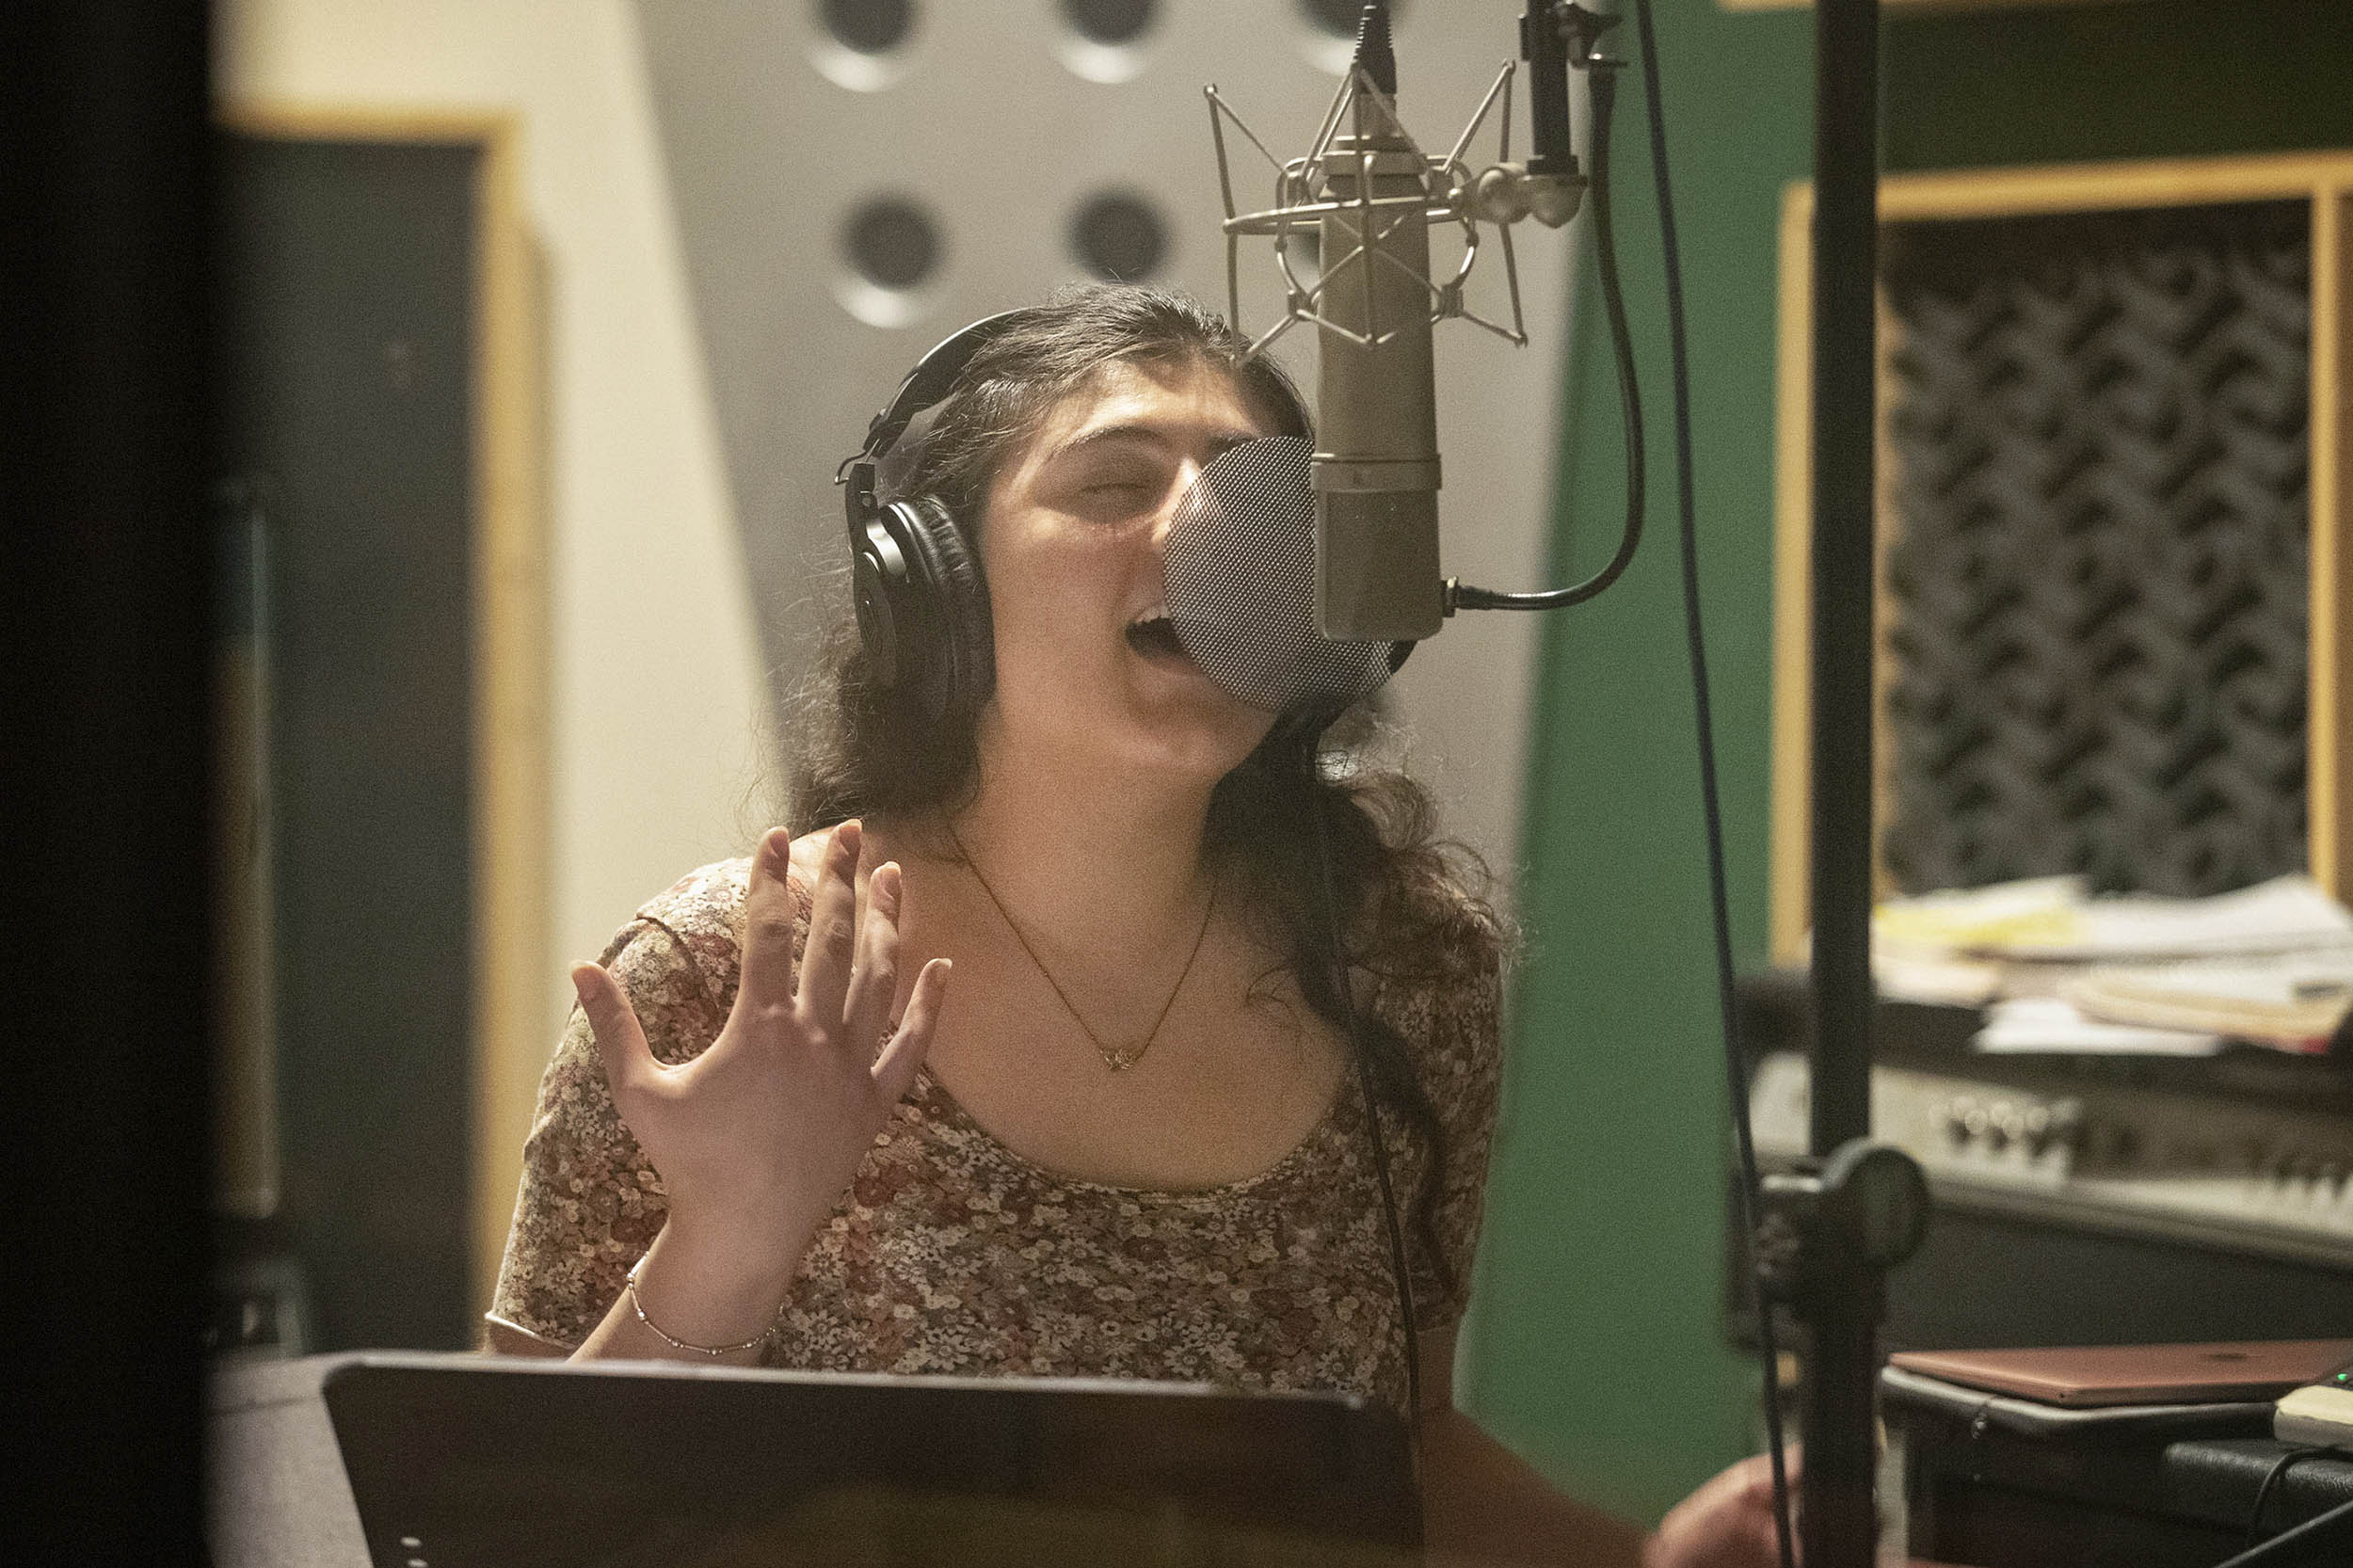 Student singer Tina Hashemi recorded a distinguished majors project and contributed to John D’earth’s “Infernal Resilience” project. (Photos by Dan Addison, University Communications)